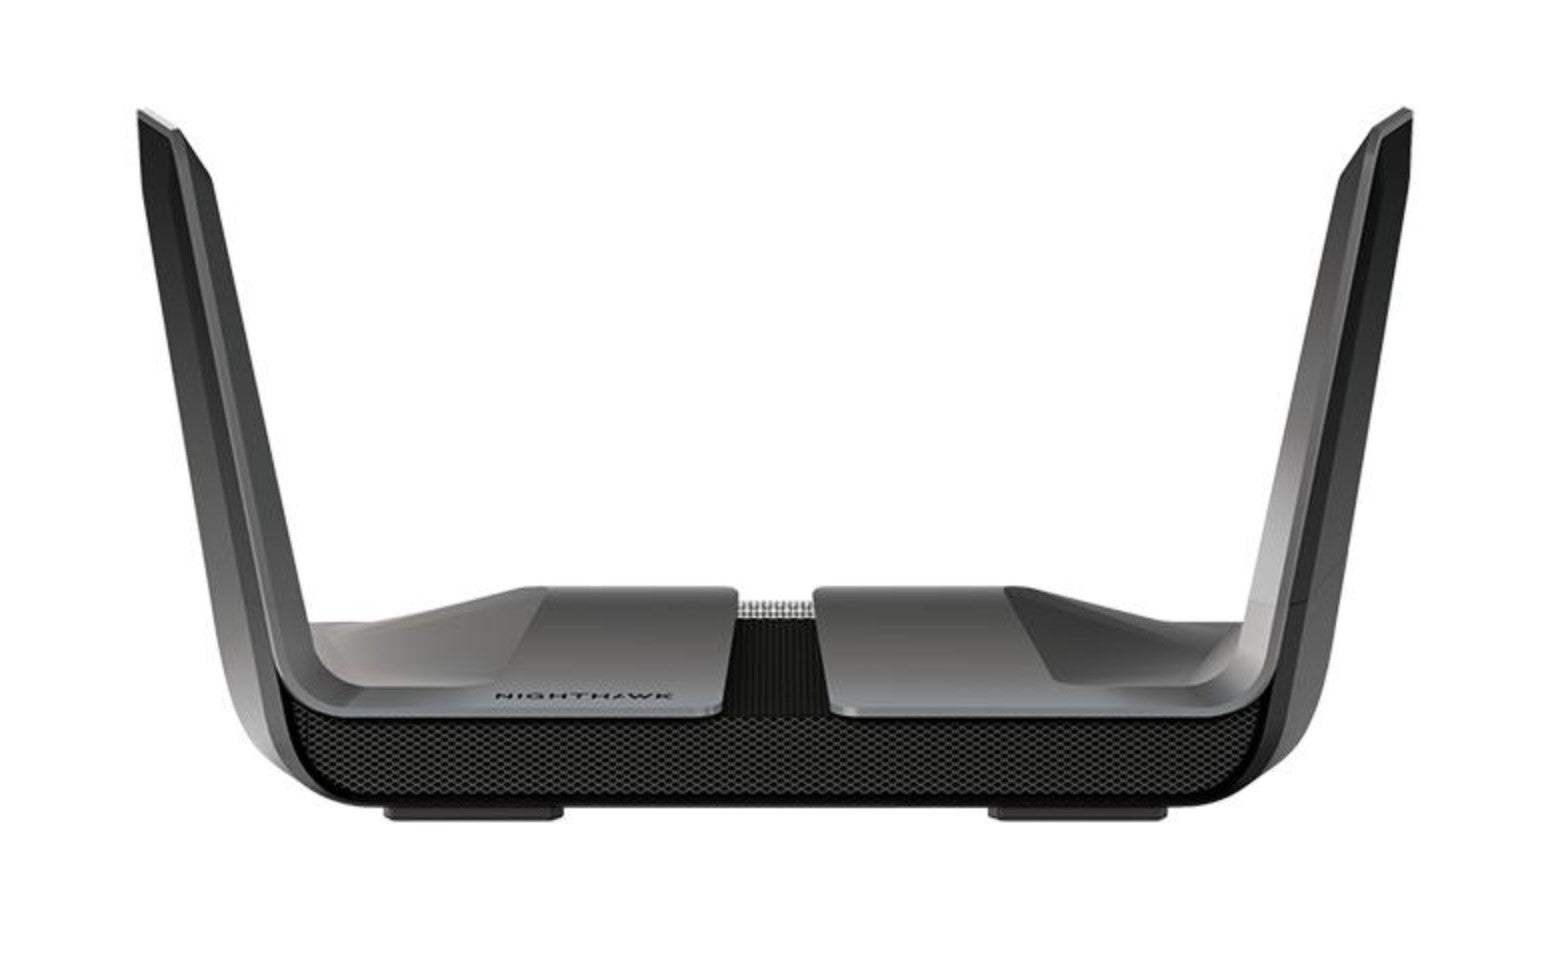 NETGEAR RAX75-100NAR Nighthawk 8-Stream Dual-Band up to 5.7Gbps WiFi 6 Router - Certified Refurbished